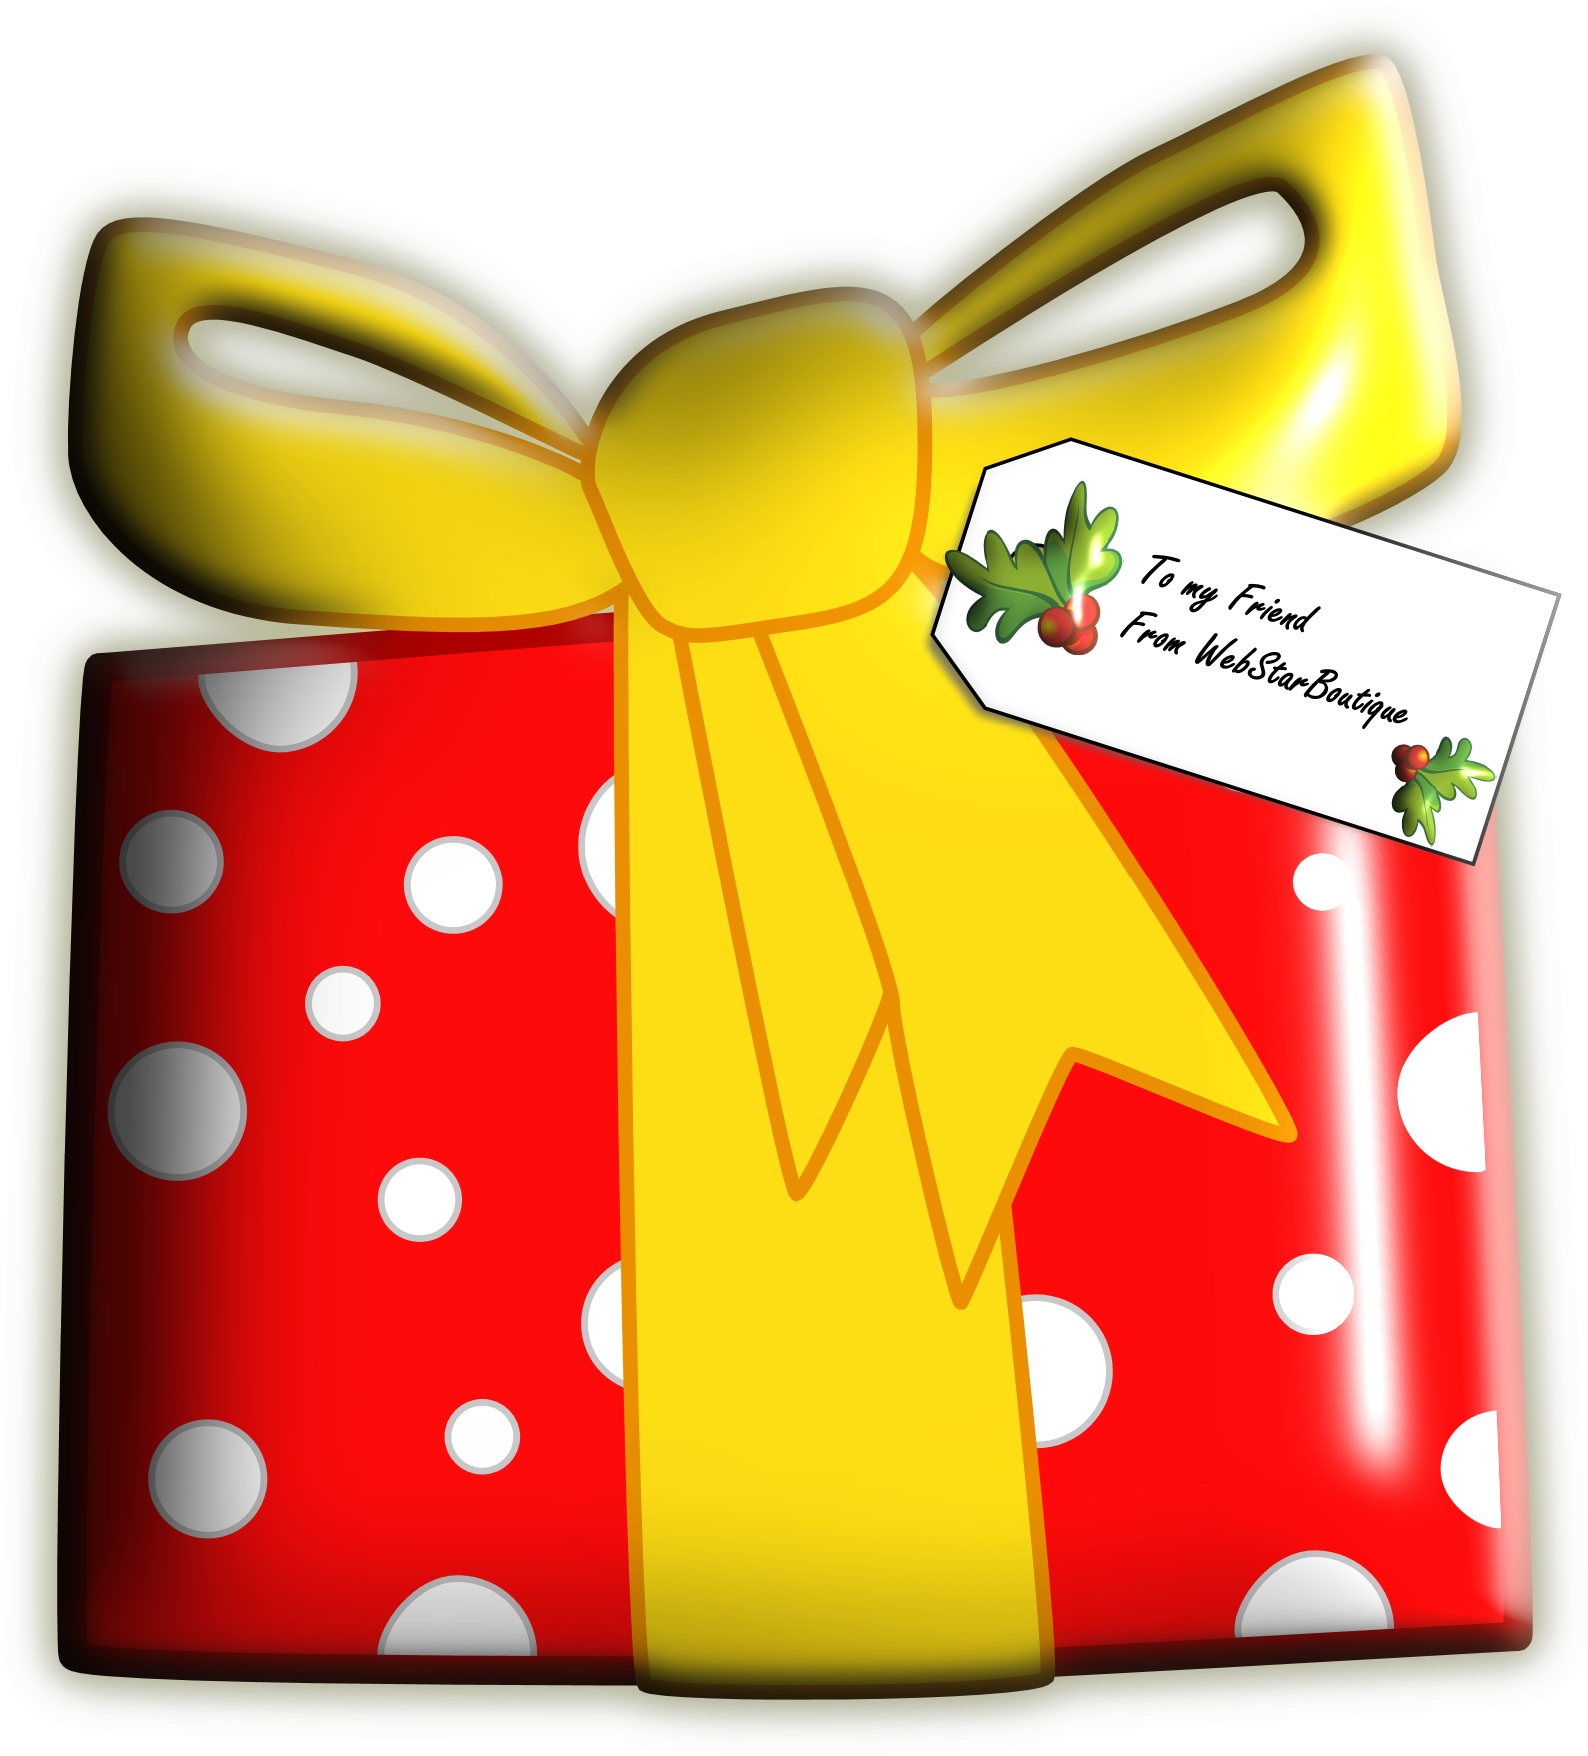 Click Here On Christmas Day To Open Your Gift - Click Here On Christmas Day To Open Your Gift (1599x1769)